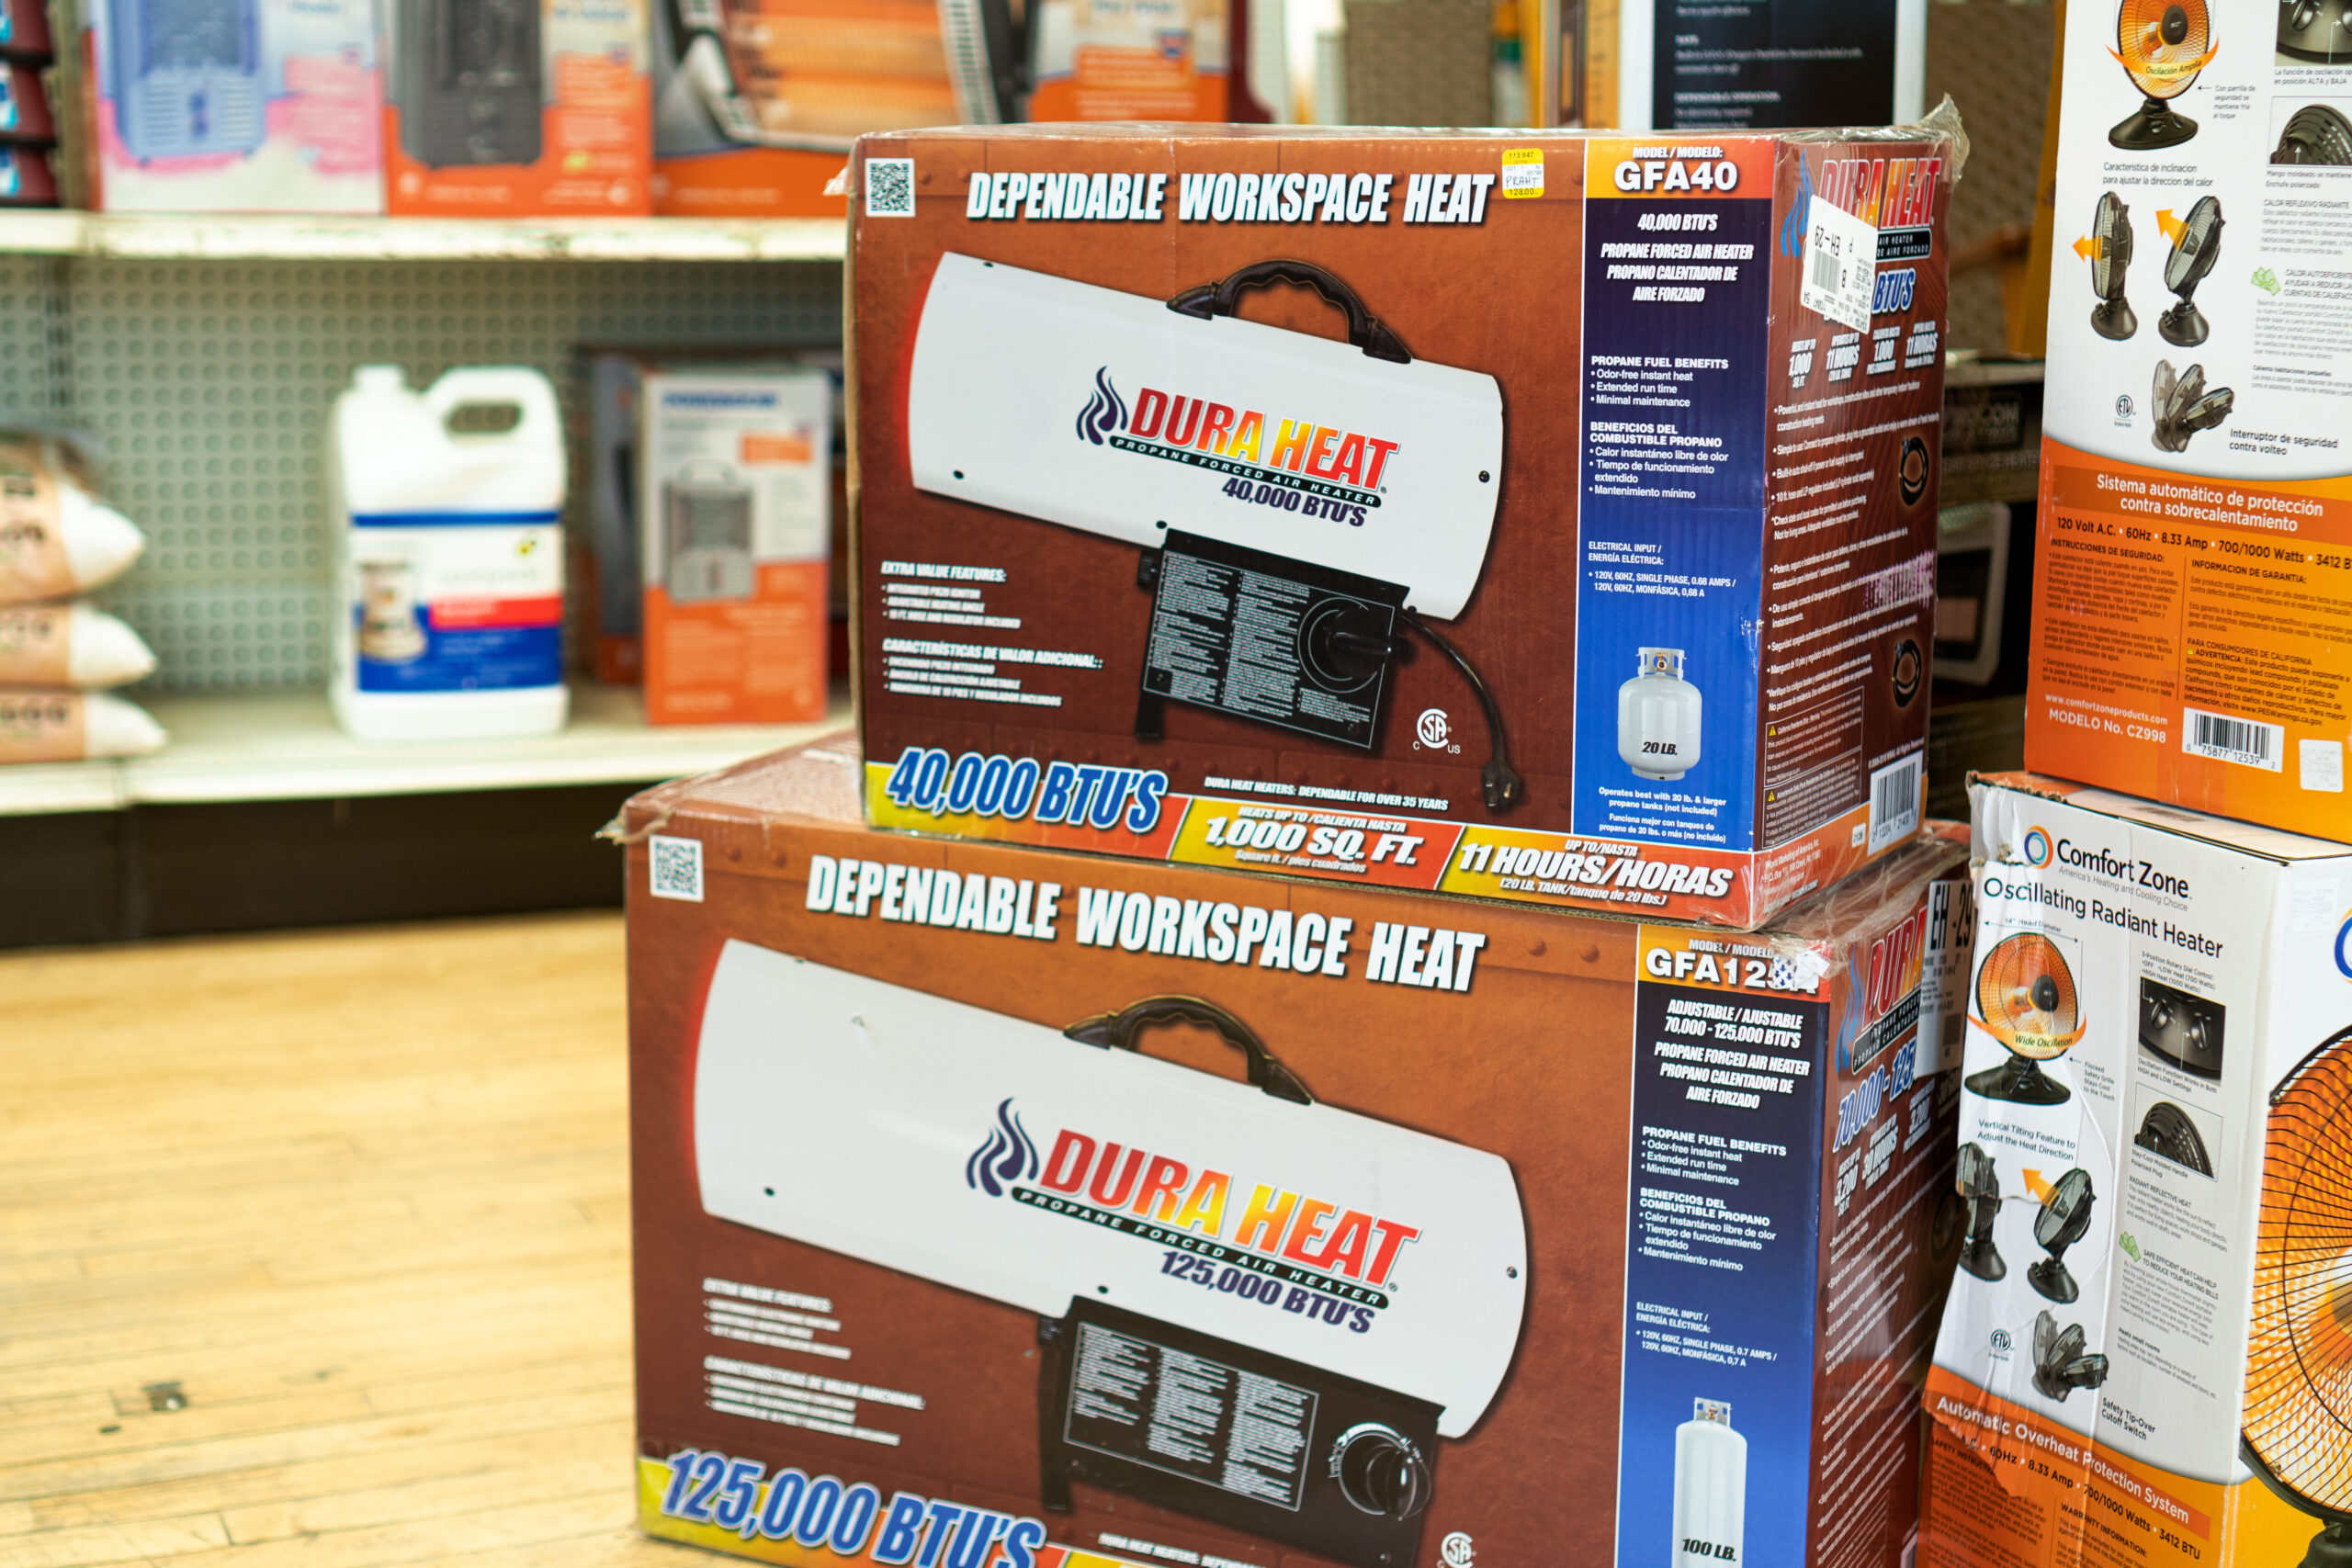 Several boxes containing Dura Heat brand propane forced air heaters